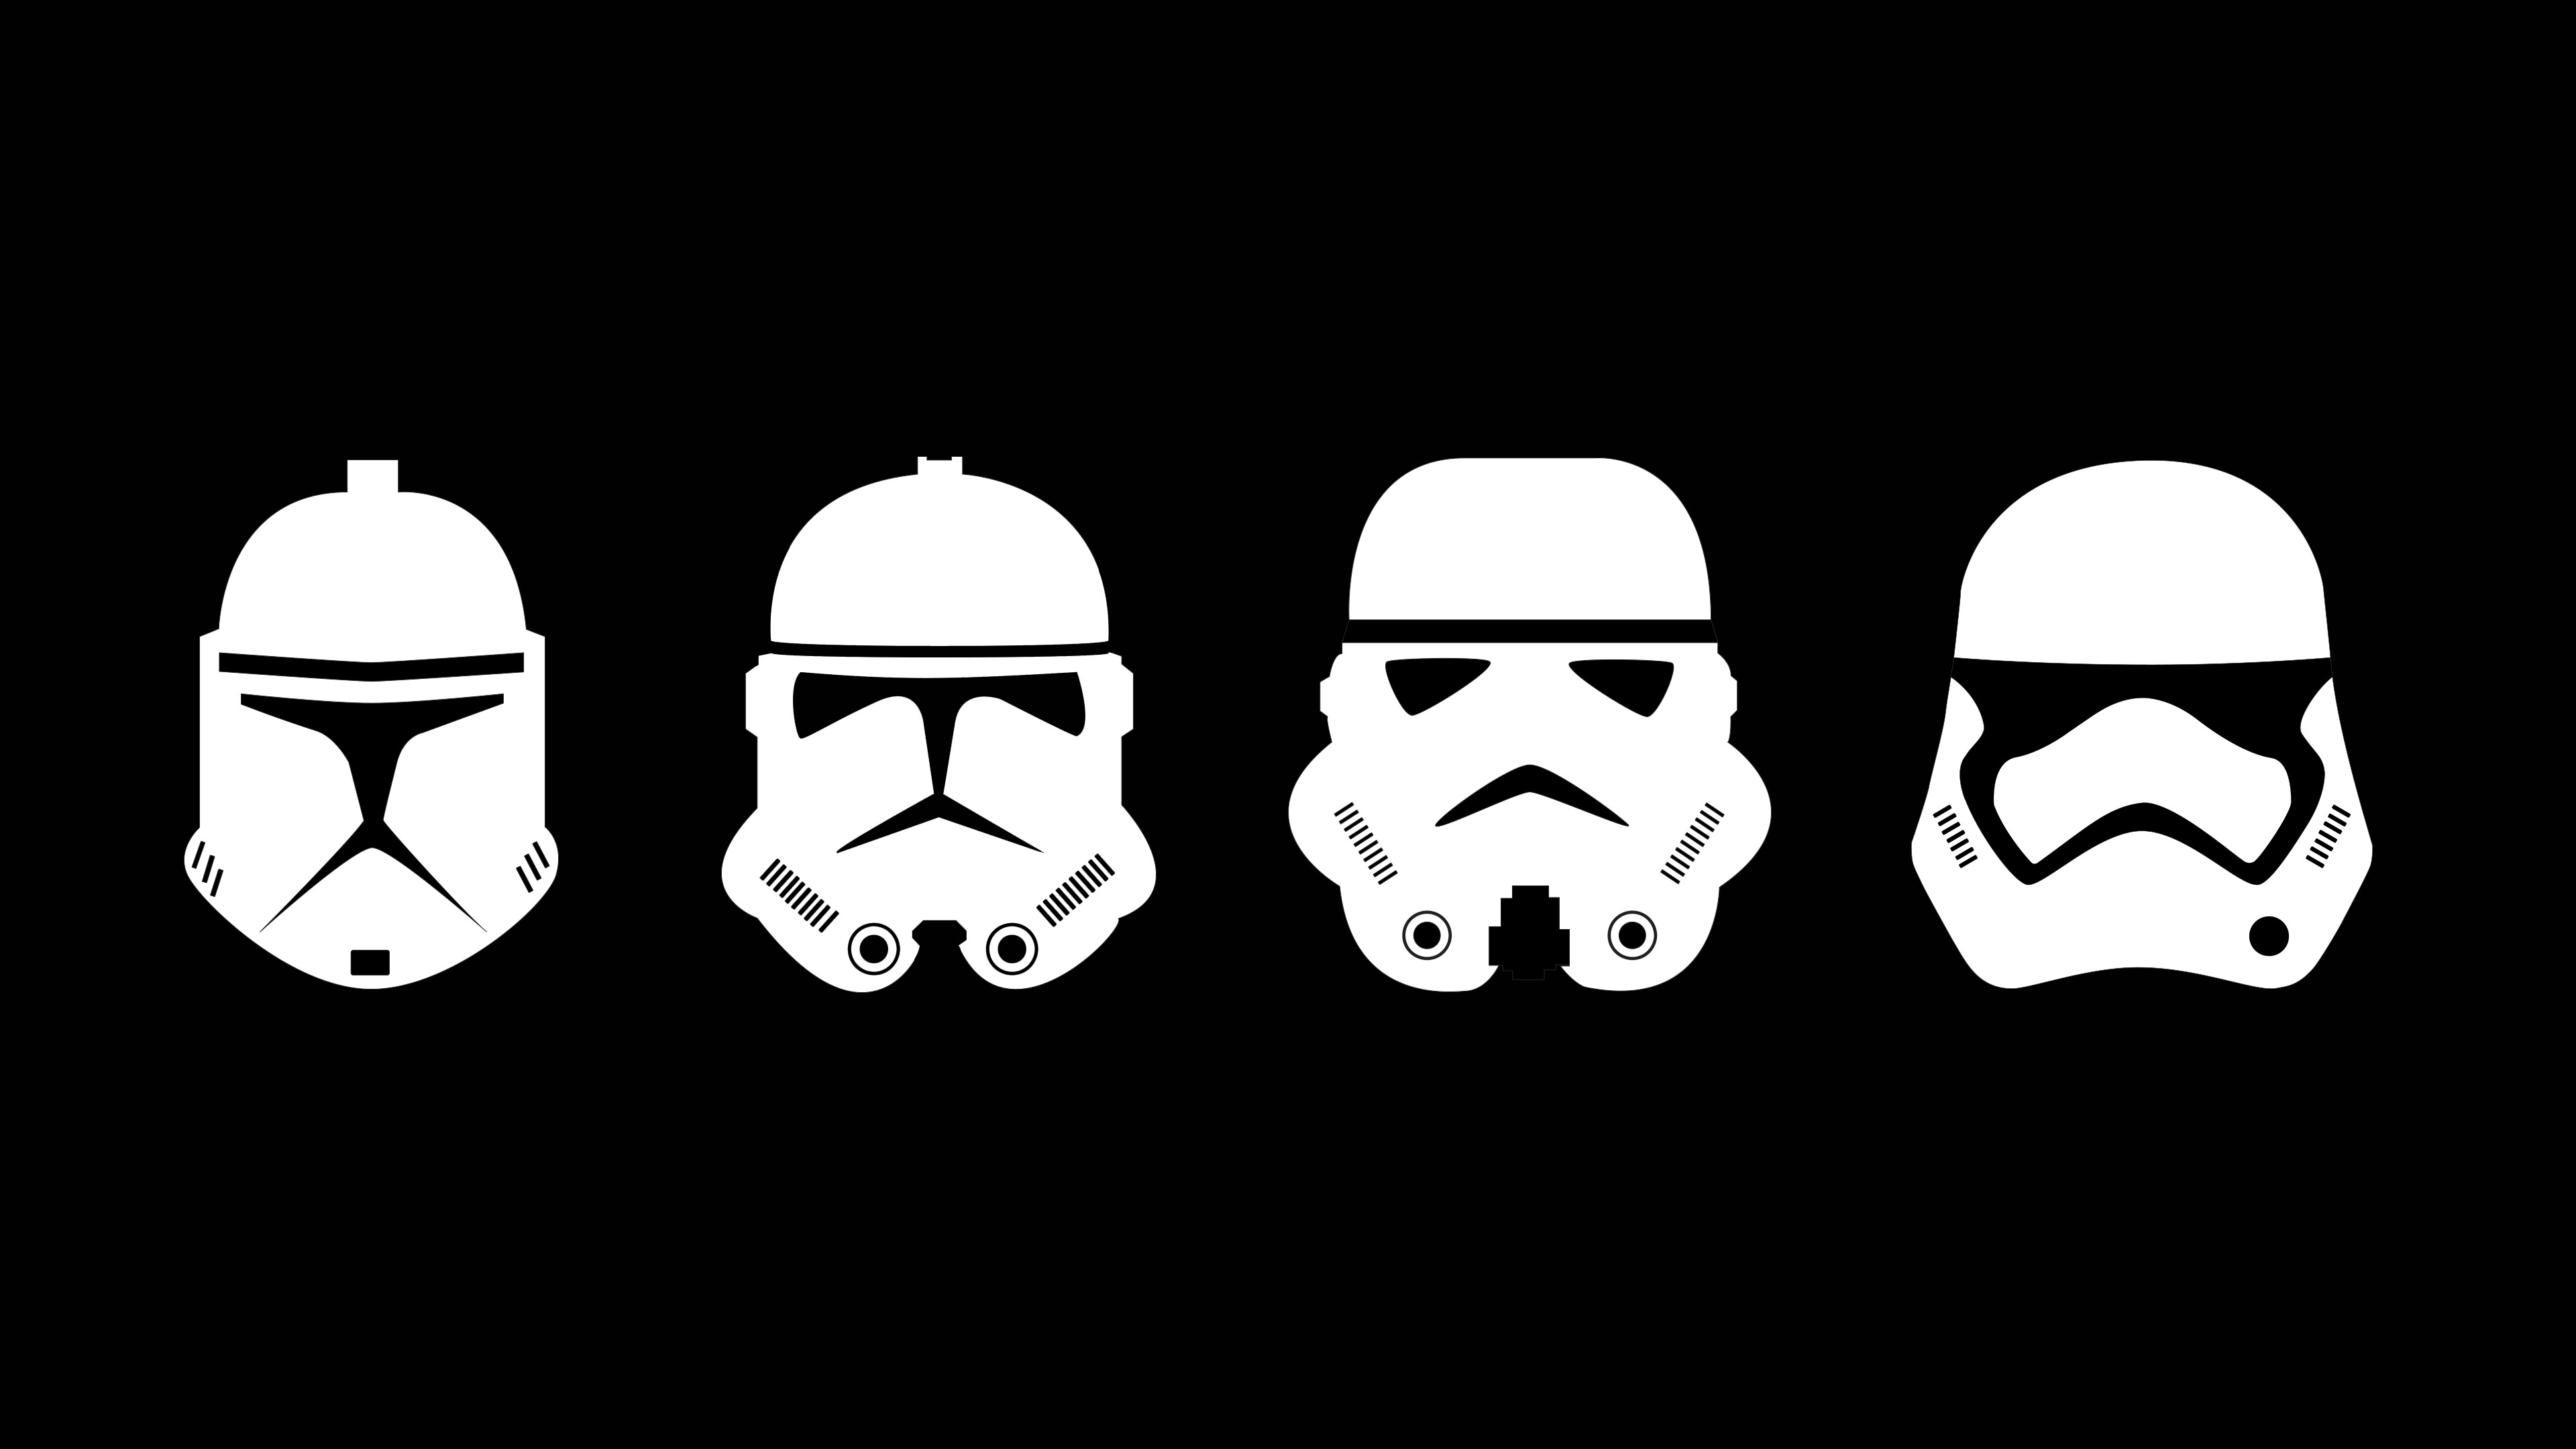 3840x2160 Star Wars Wallpapers New